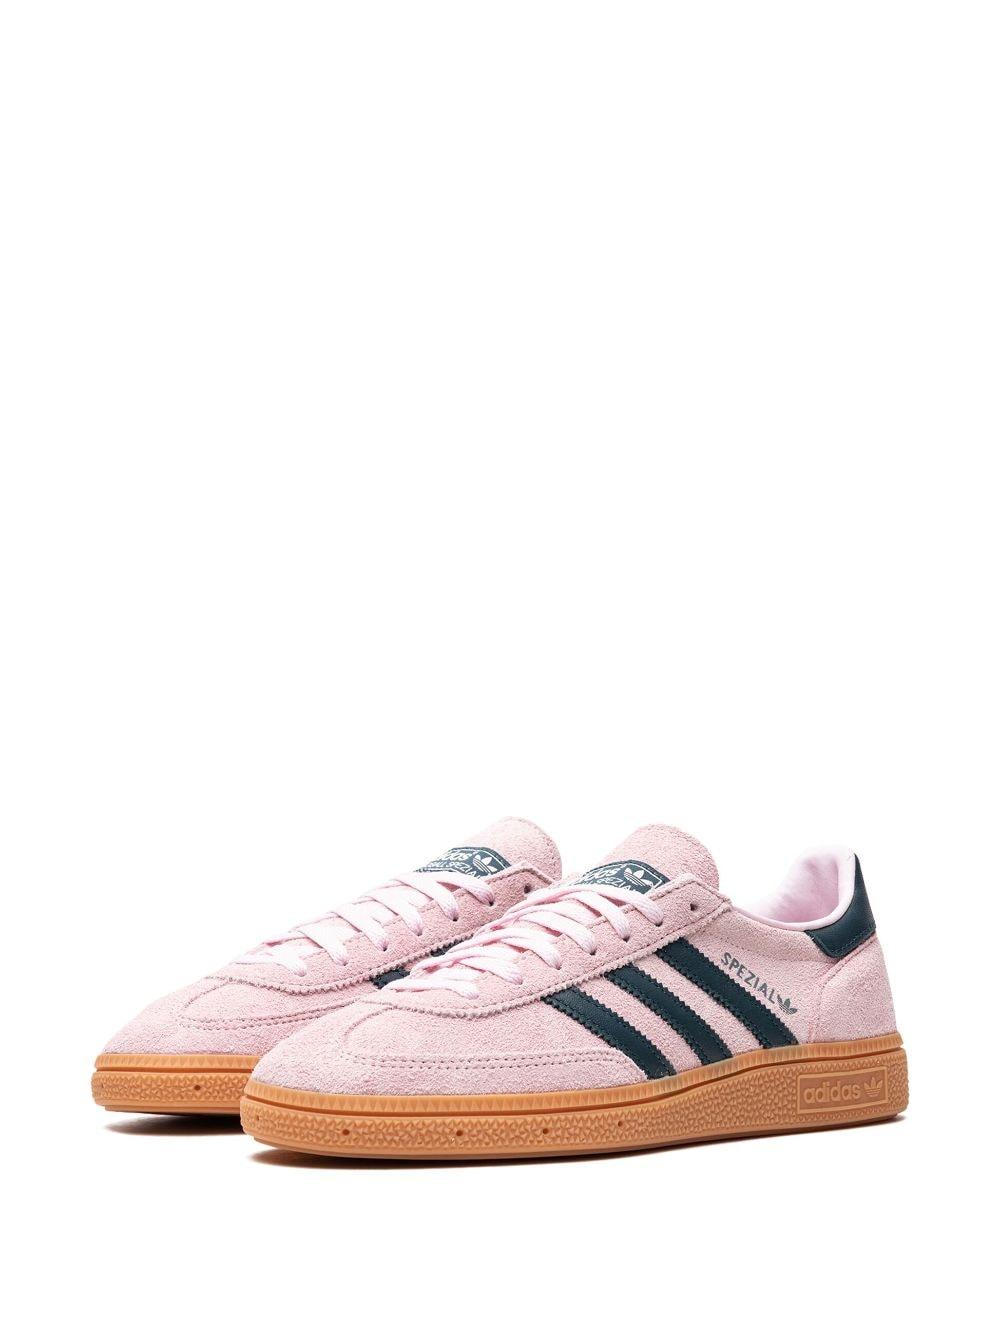 adidas Handball Spezial "clear Pink" Sneakers | Lyst